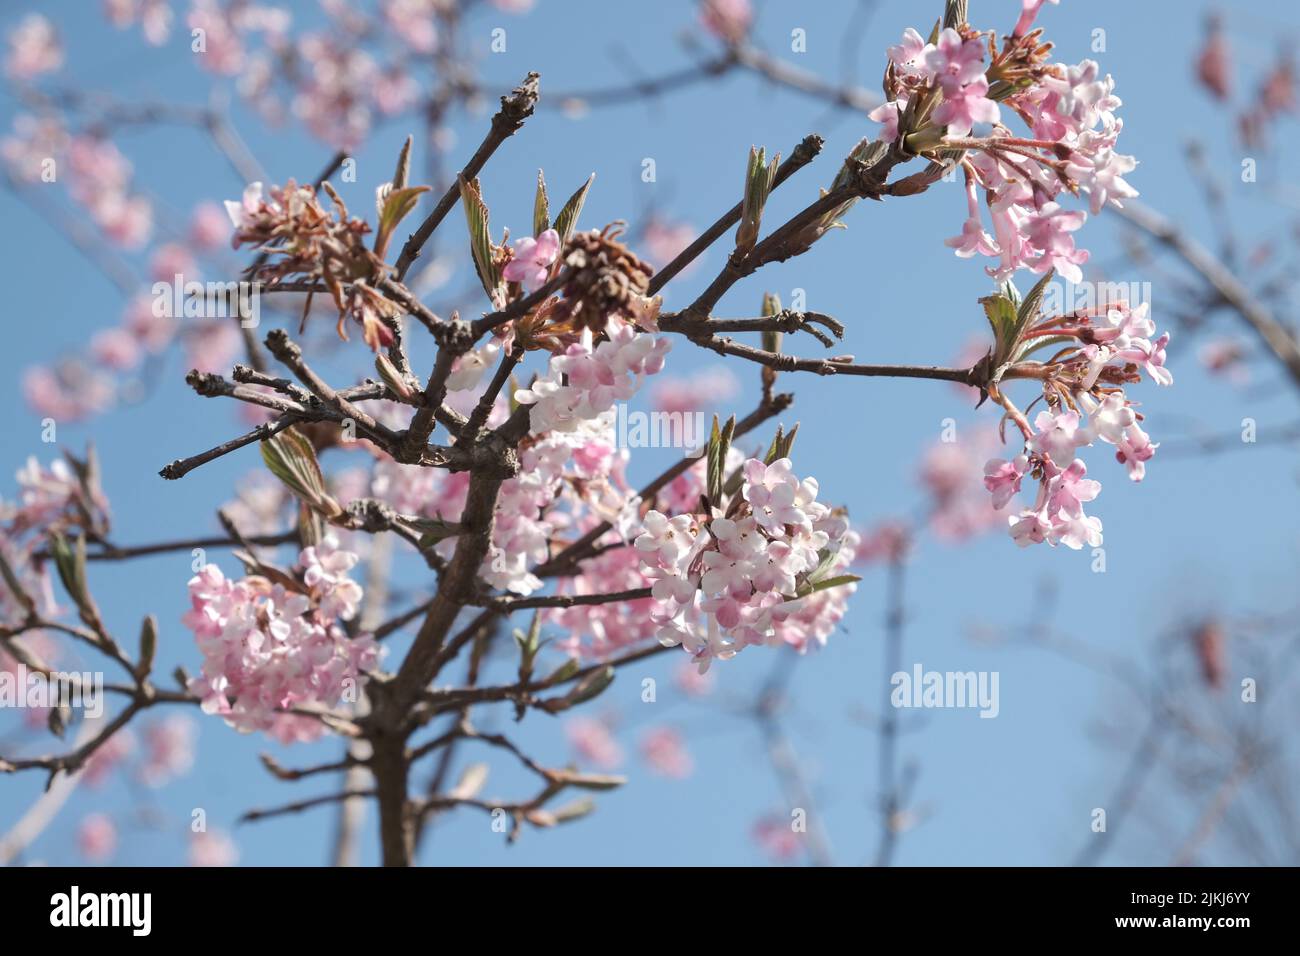 Cherry blossom, spring, bloom, pink, blue sky, pink flowers Stock Photo